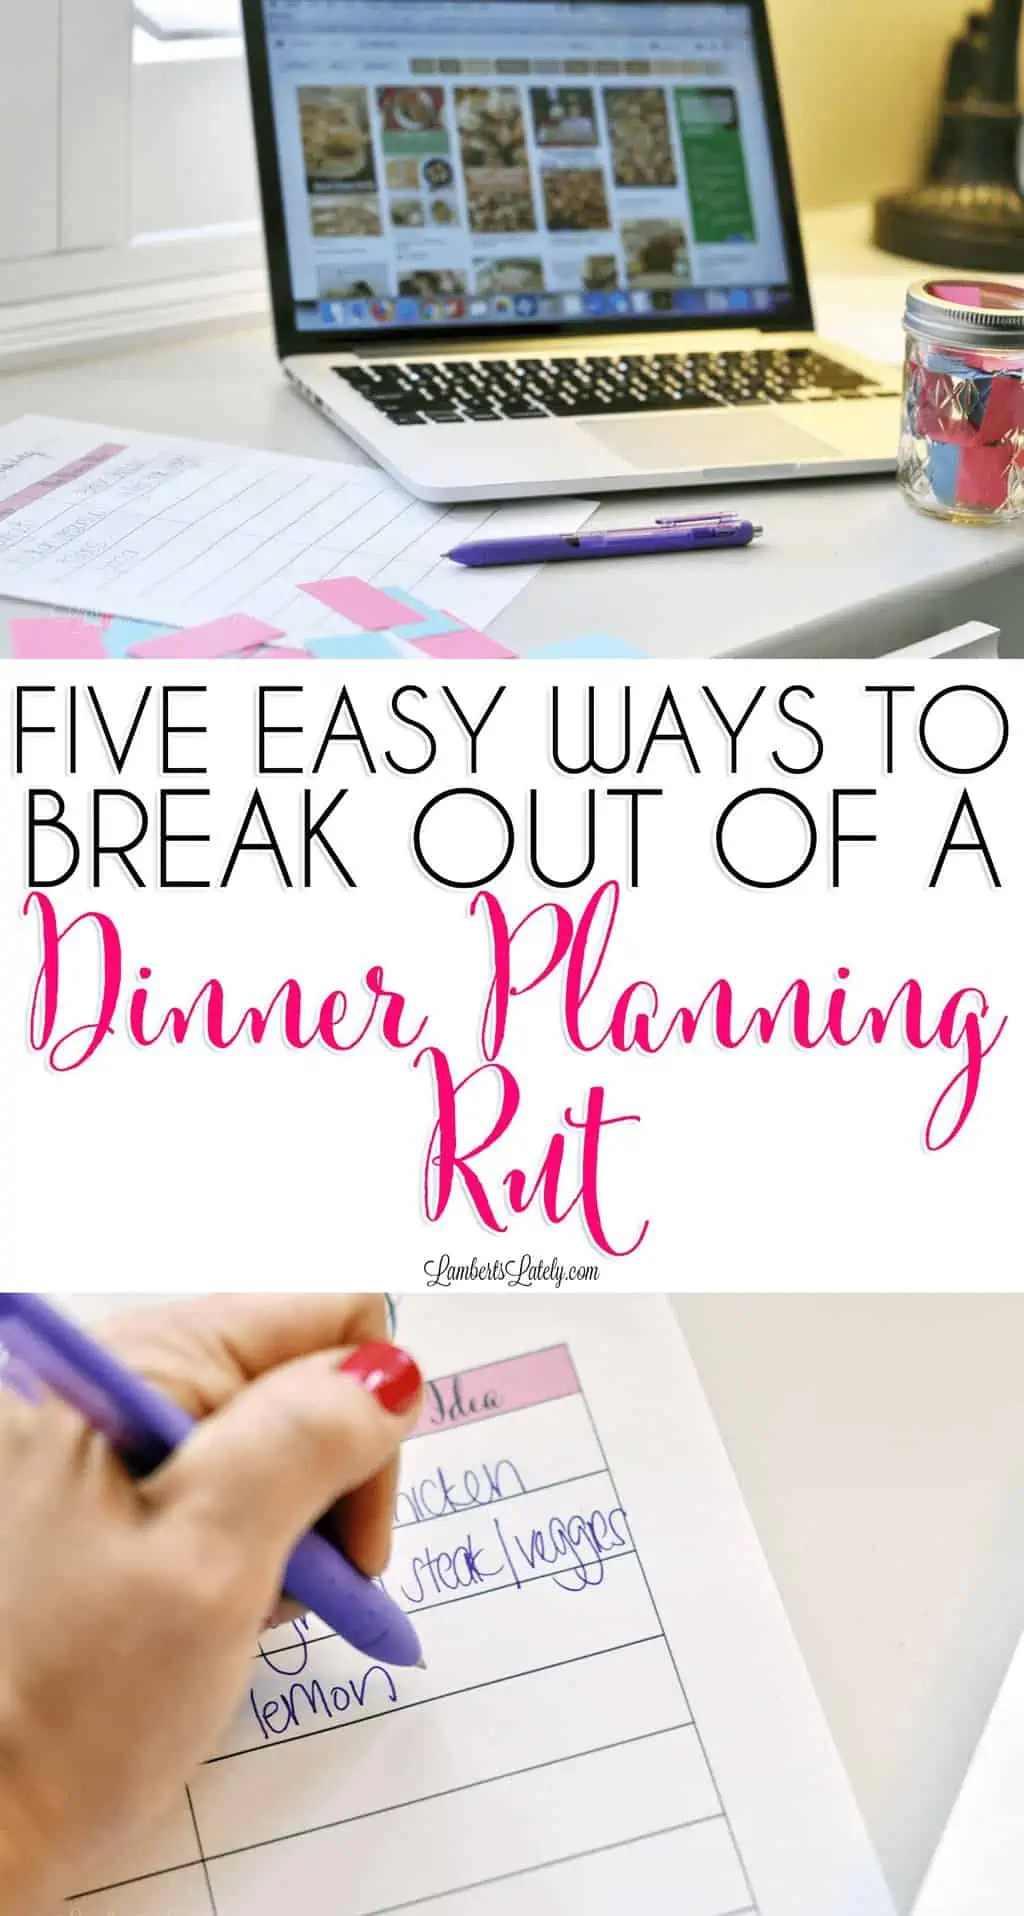 five easy ways to break out of a dinner planning rut.